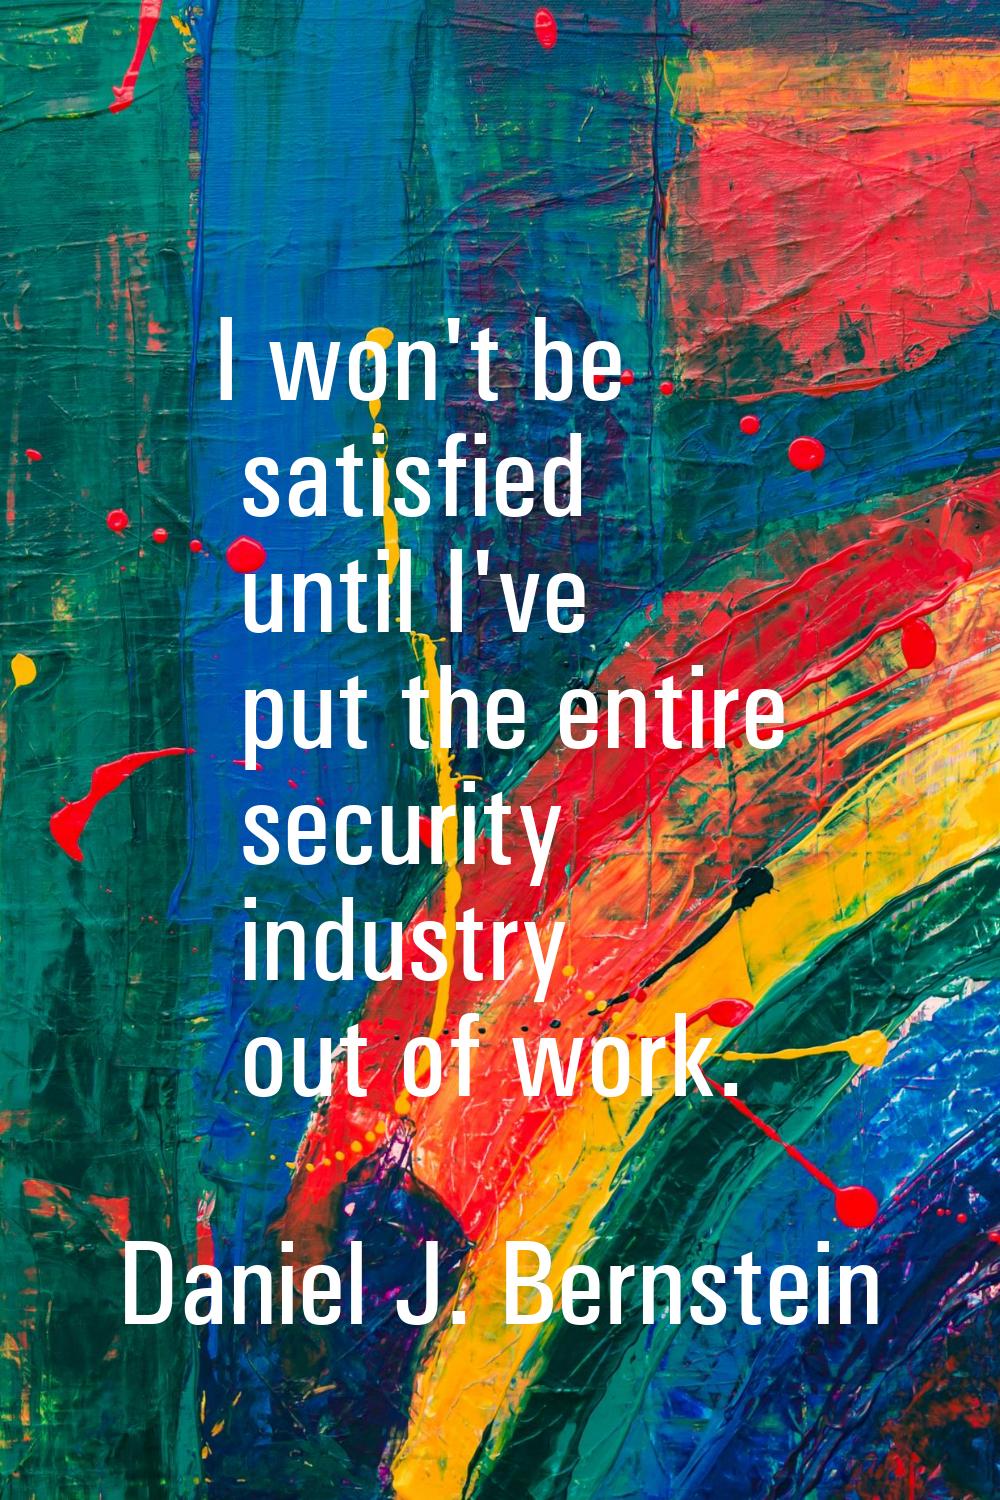 I won't be satisfied until I've put the entire security industry out of work.